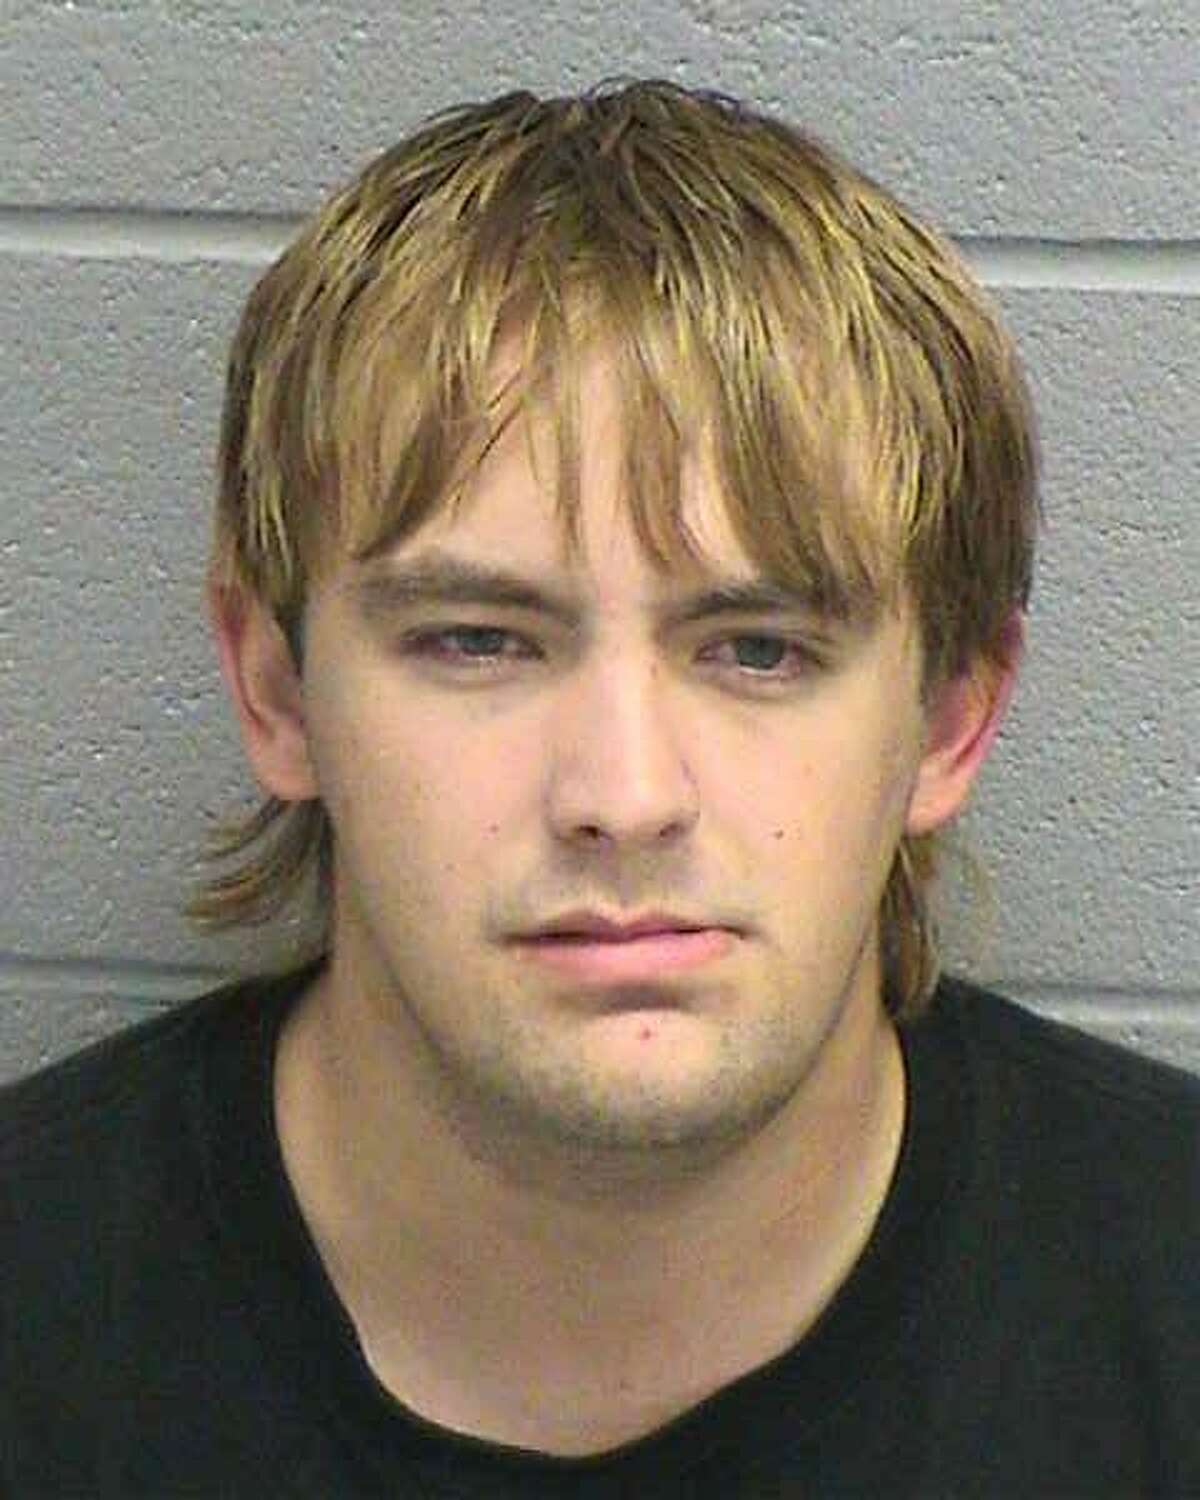 Matthew Alexander Carroll, a convicted felon, as been arrested in connection with possessing firearms.